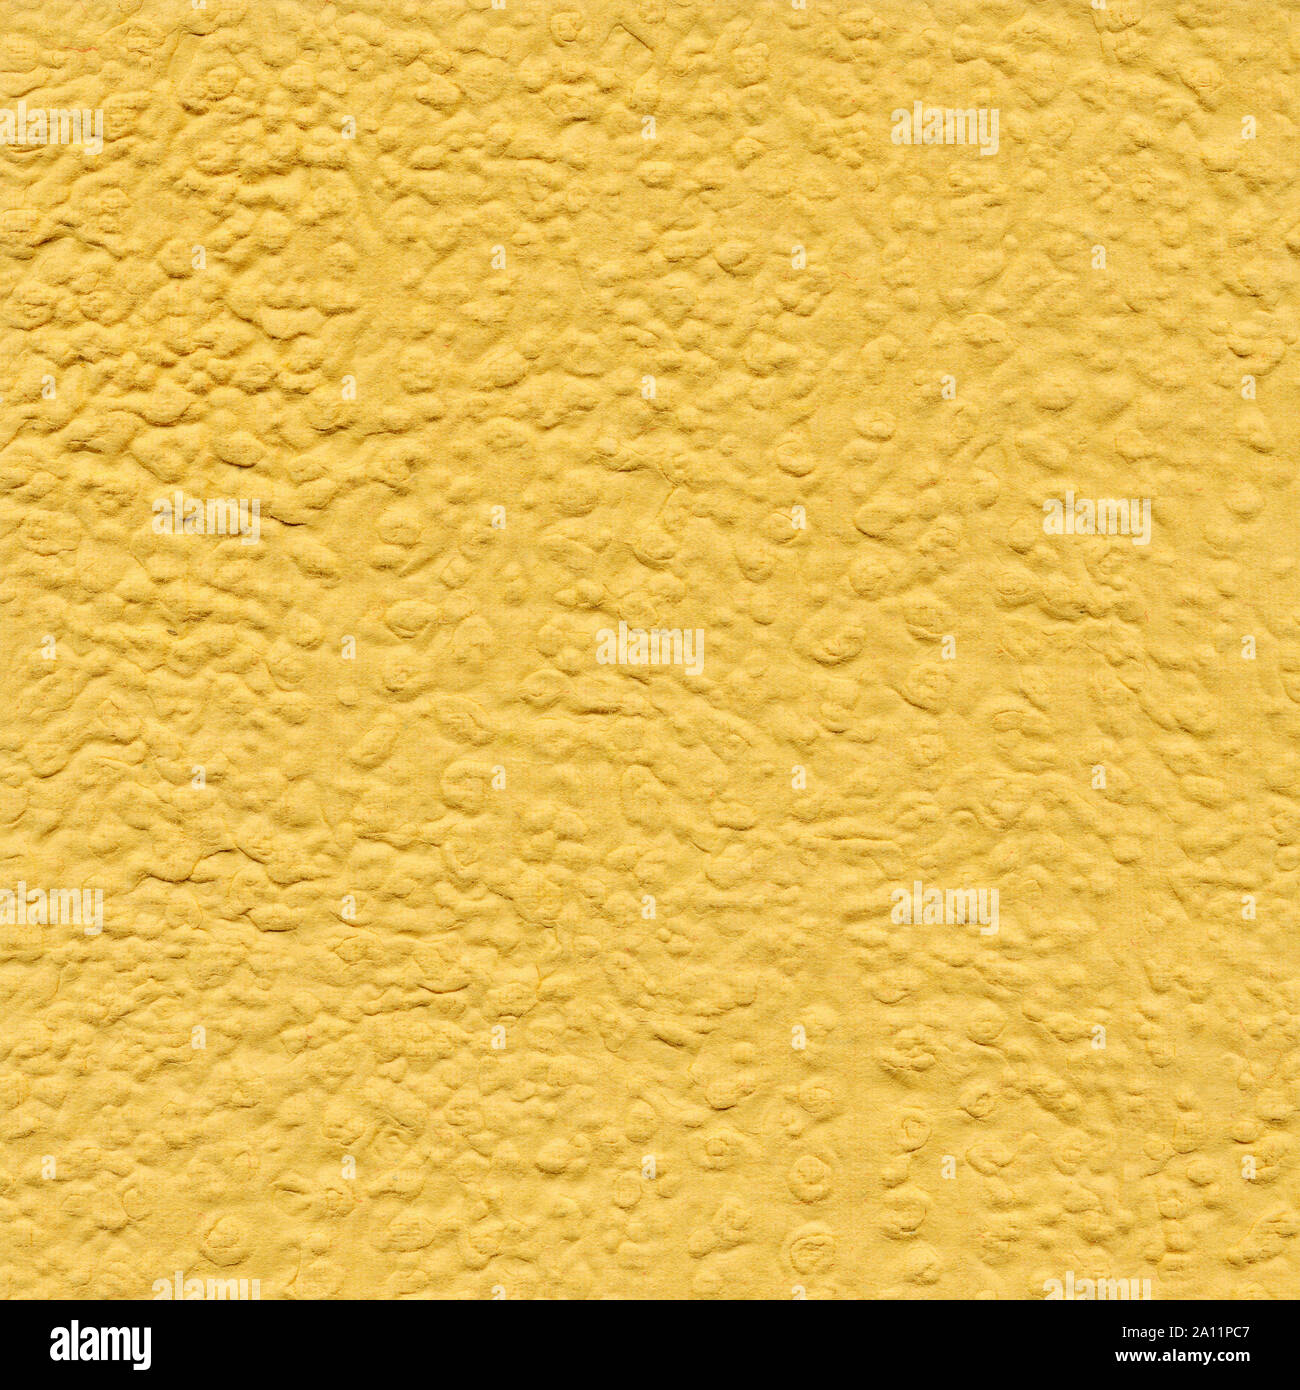 Yellow paper background with pattern. Handmade paper Stock Photo